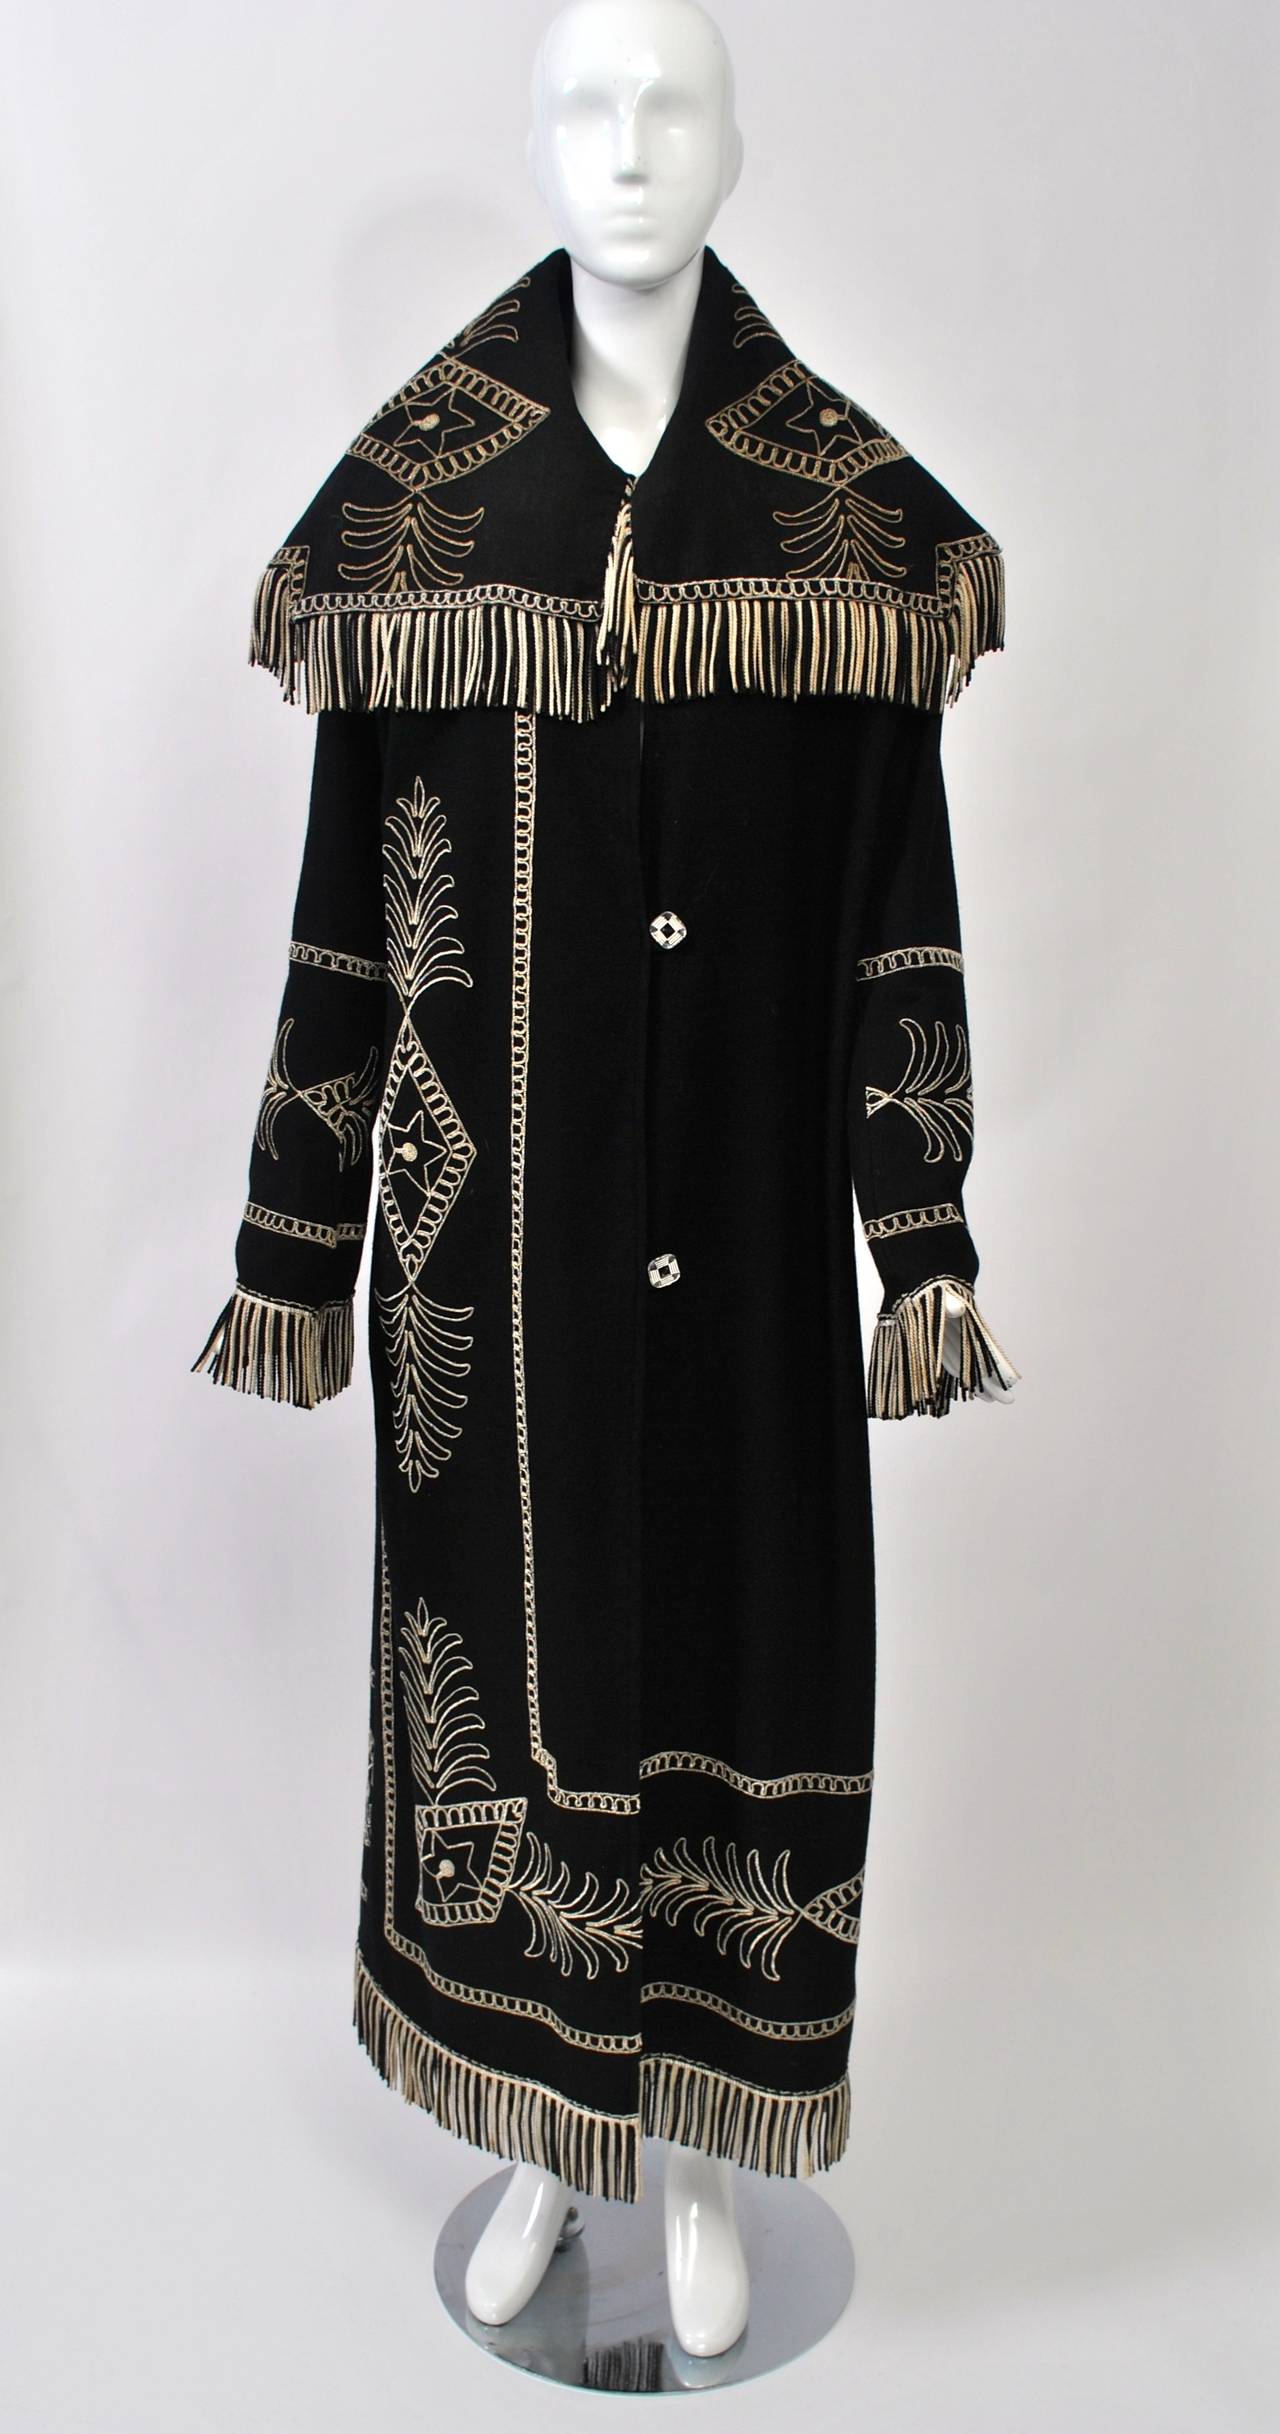 Extraoridinary and unique coat in a fine black wool enlivened by beige embroidery and trimmed with beige and black fringe. Purportedly partially fashioned from French 1890s portieres in 2006, the long coat has a huge stand-up collar and three